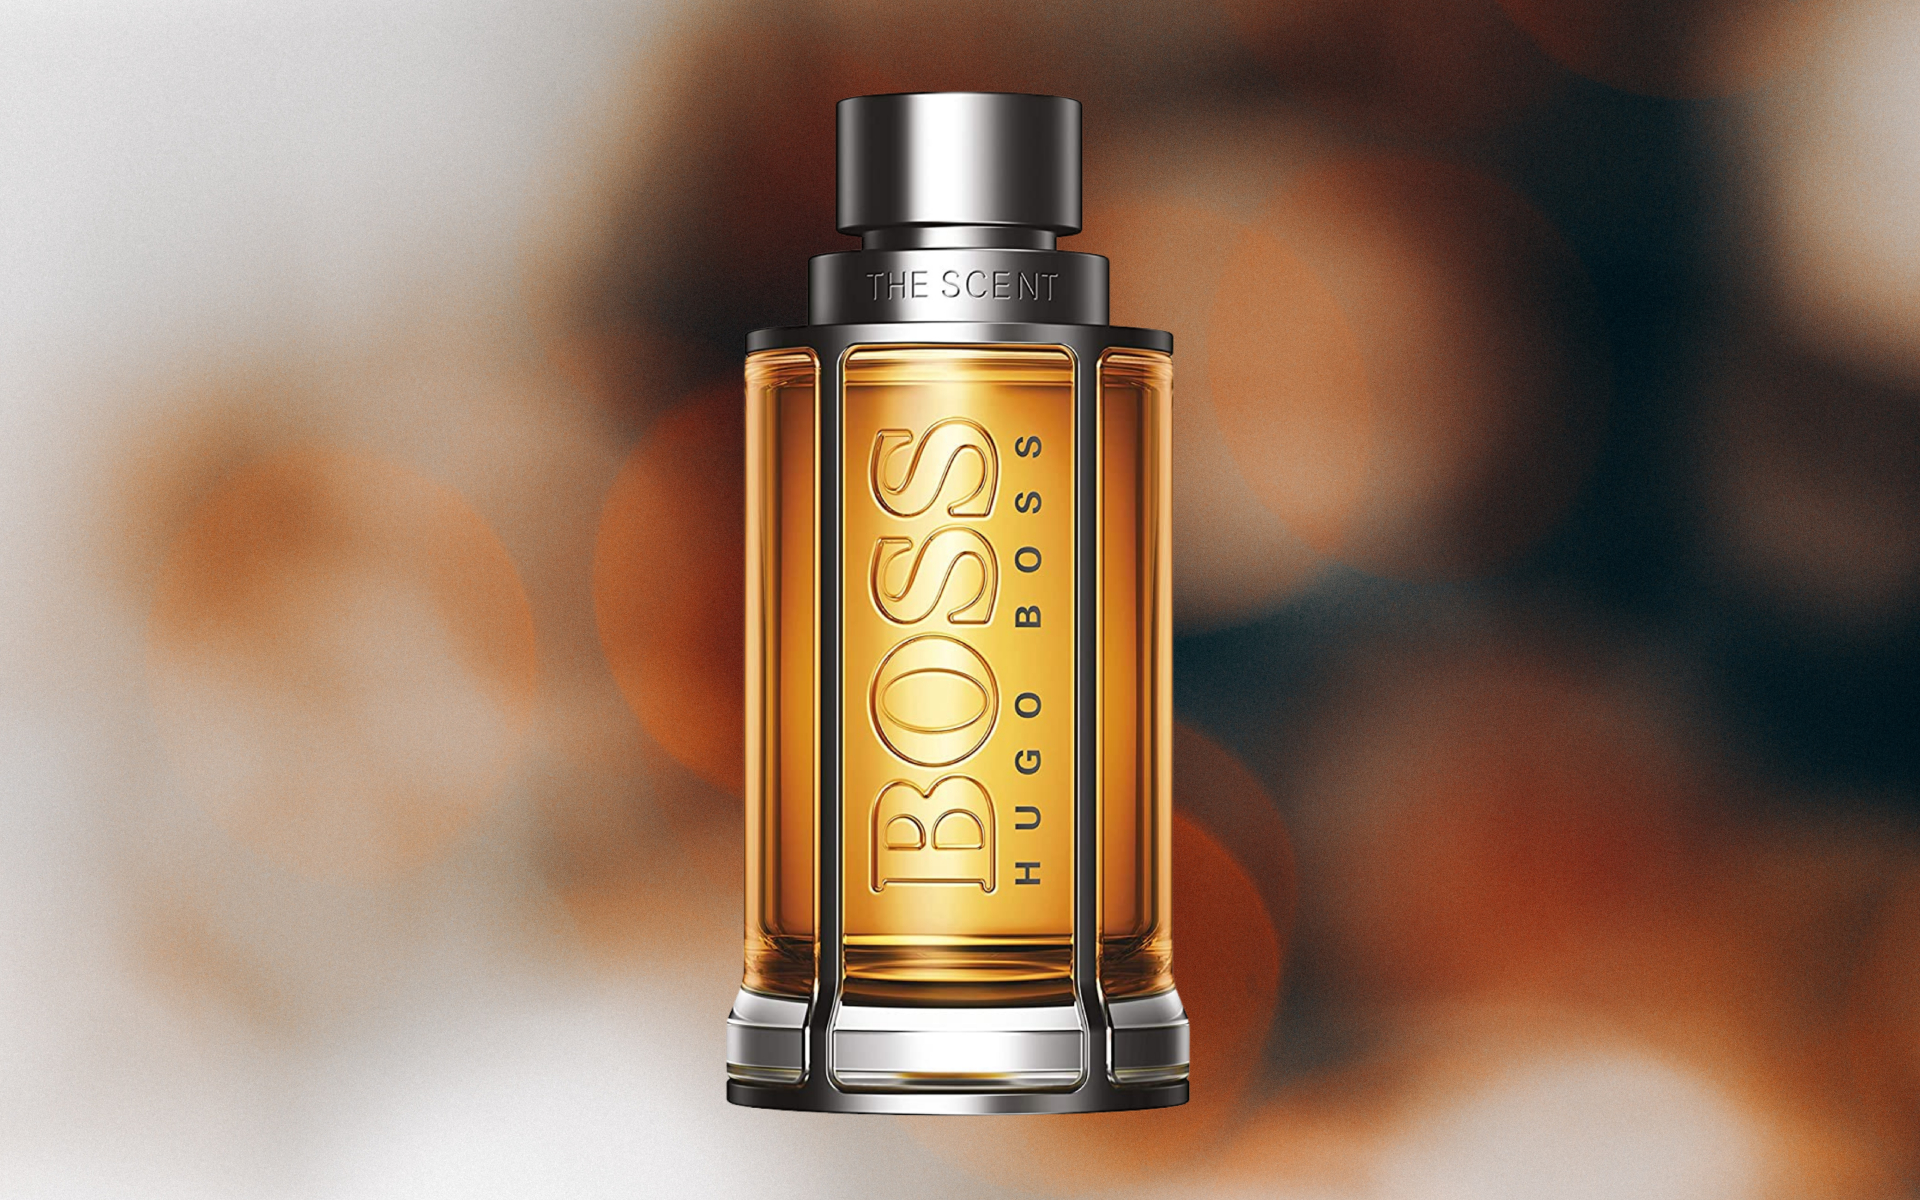 Tilstand Tryk ned præst Hugo Boss The Scent Review EDT | Scent Selective